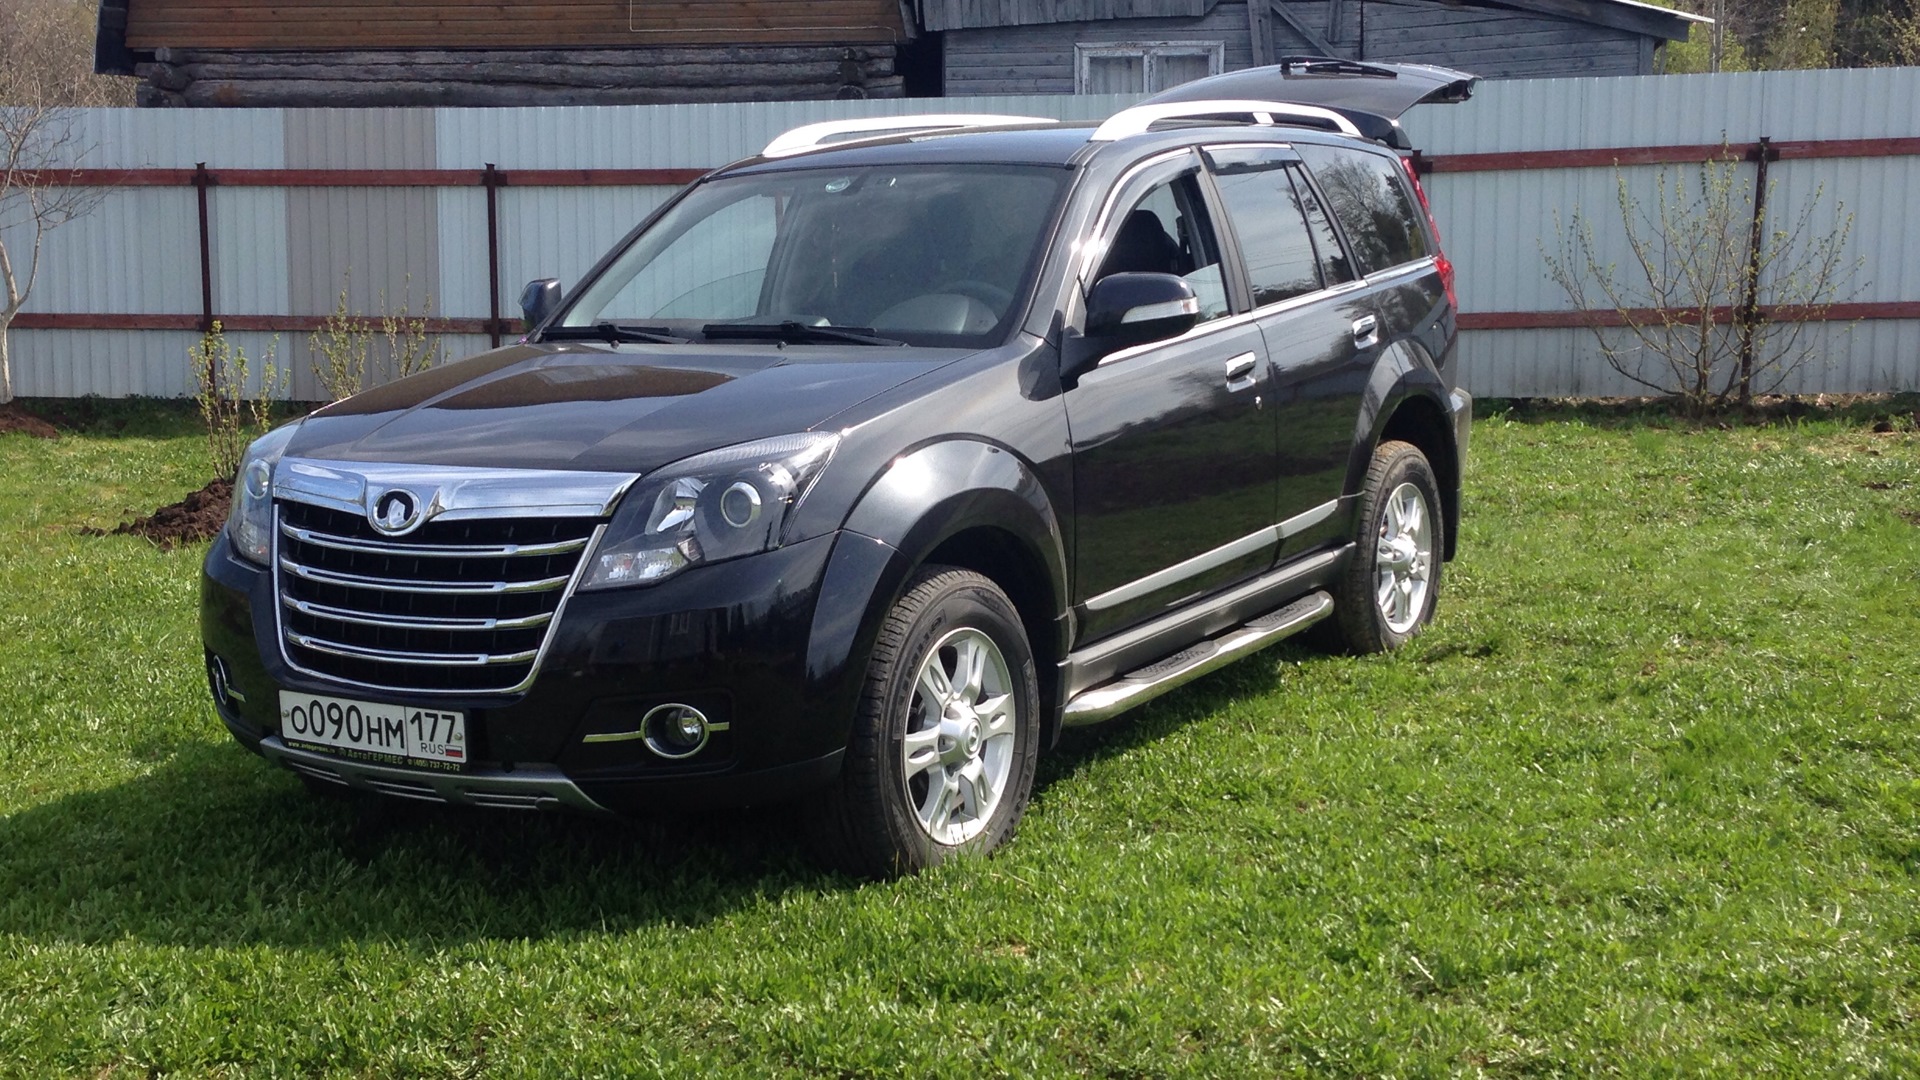 Ховер h3 2.0. Great Wall Hover h3. Hover h3 New. Great Wall Hover h3 New. Ховер 3 Нью.